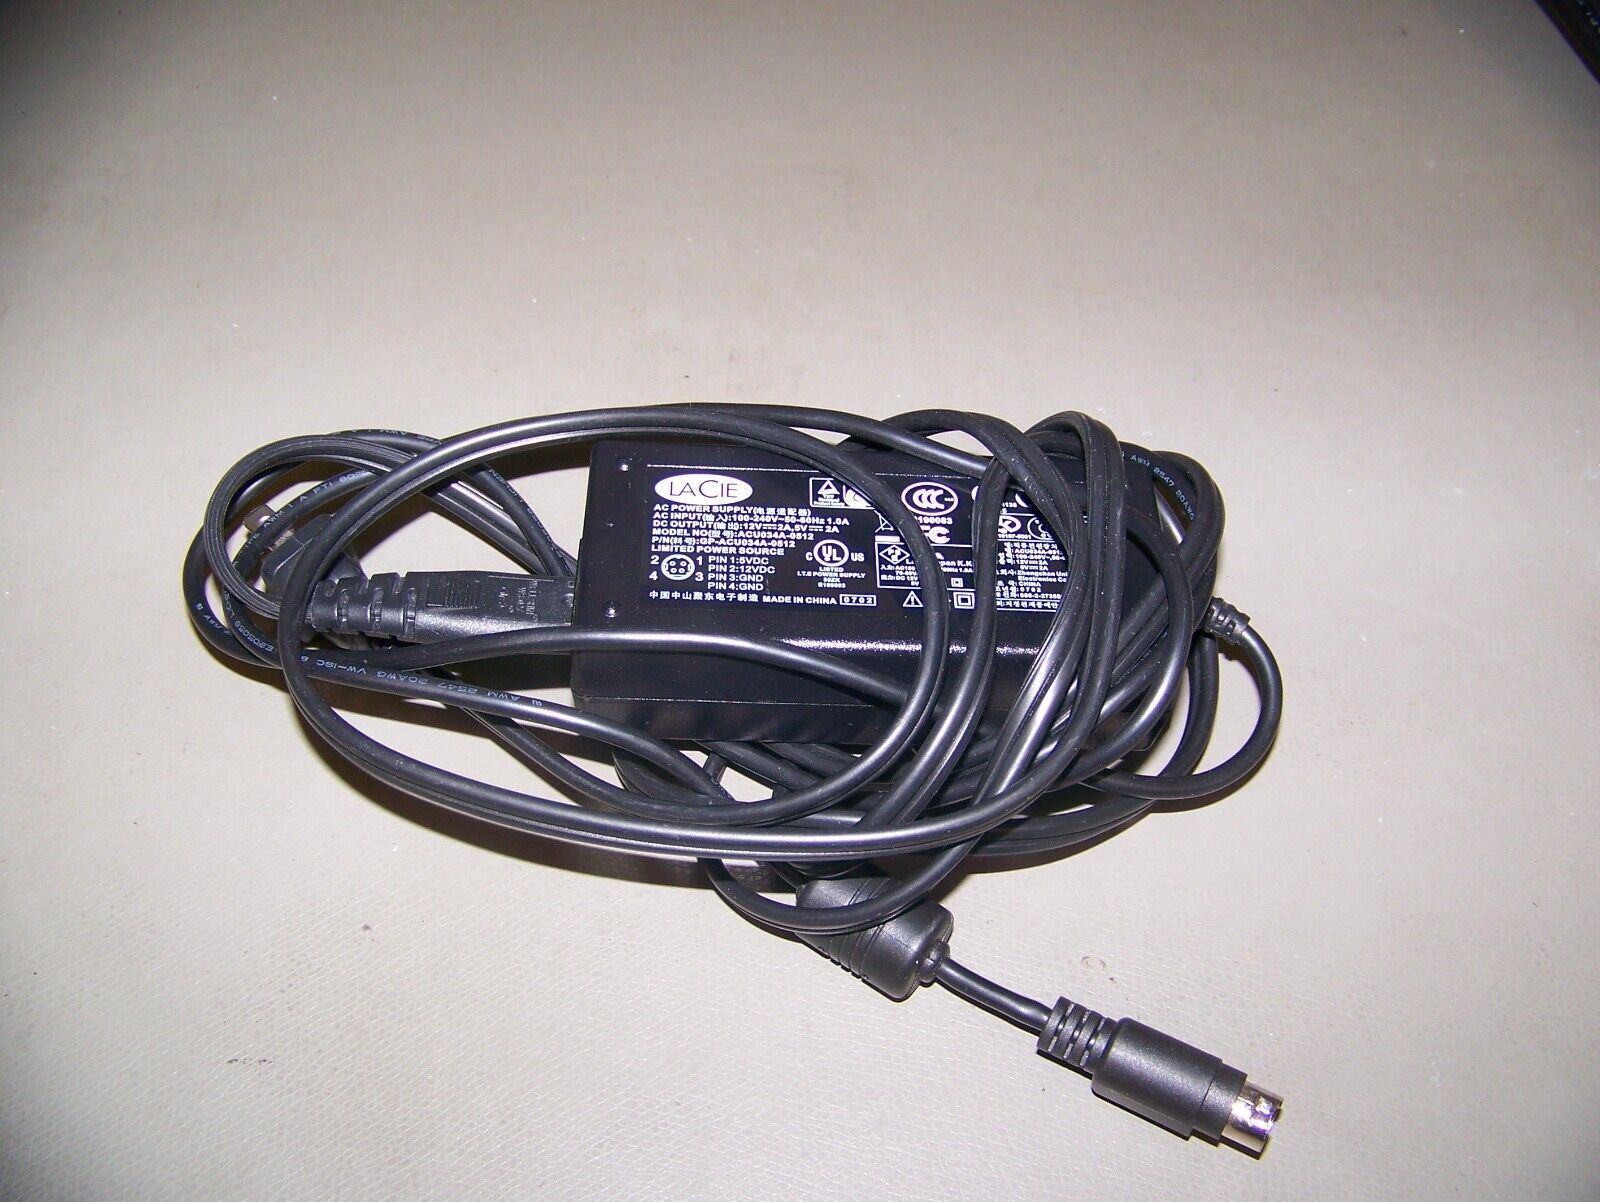 5V/2A 12V/2A LACIE ACU034A-0512 AC Power Adapter. Available Now for $15.00